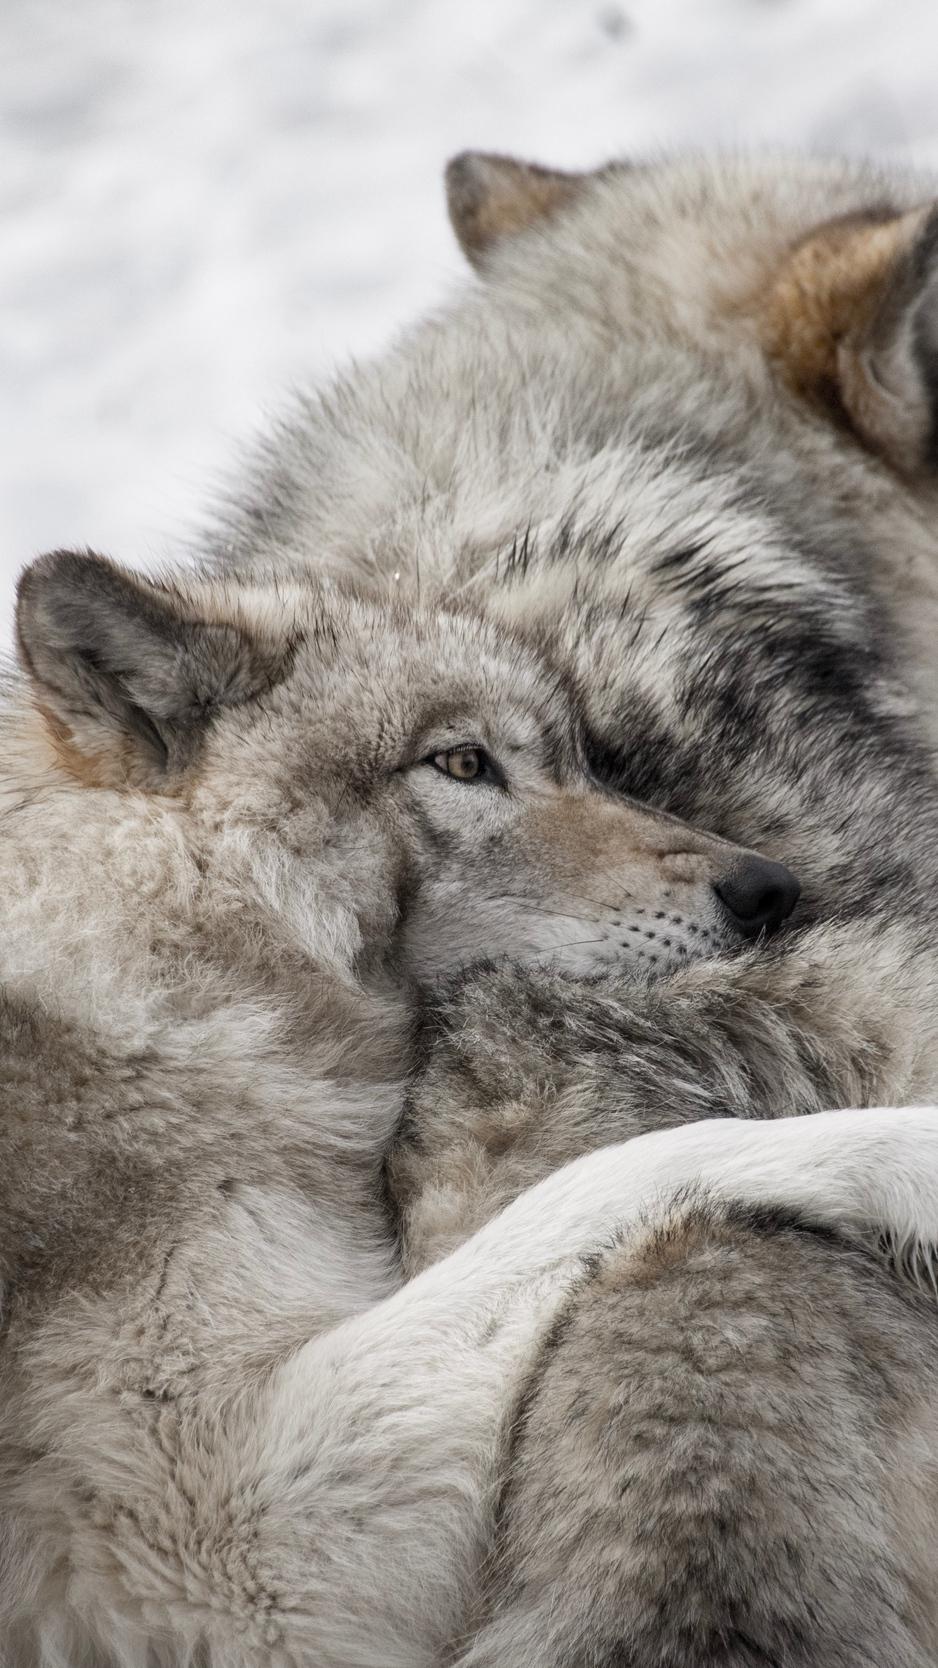 Download wallpaper 938x1668 wolves, couple, care, wildlife